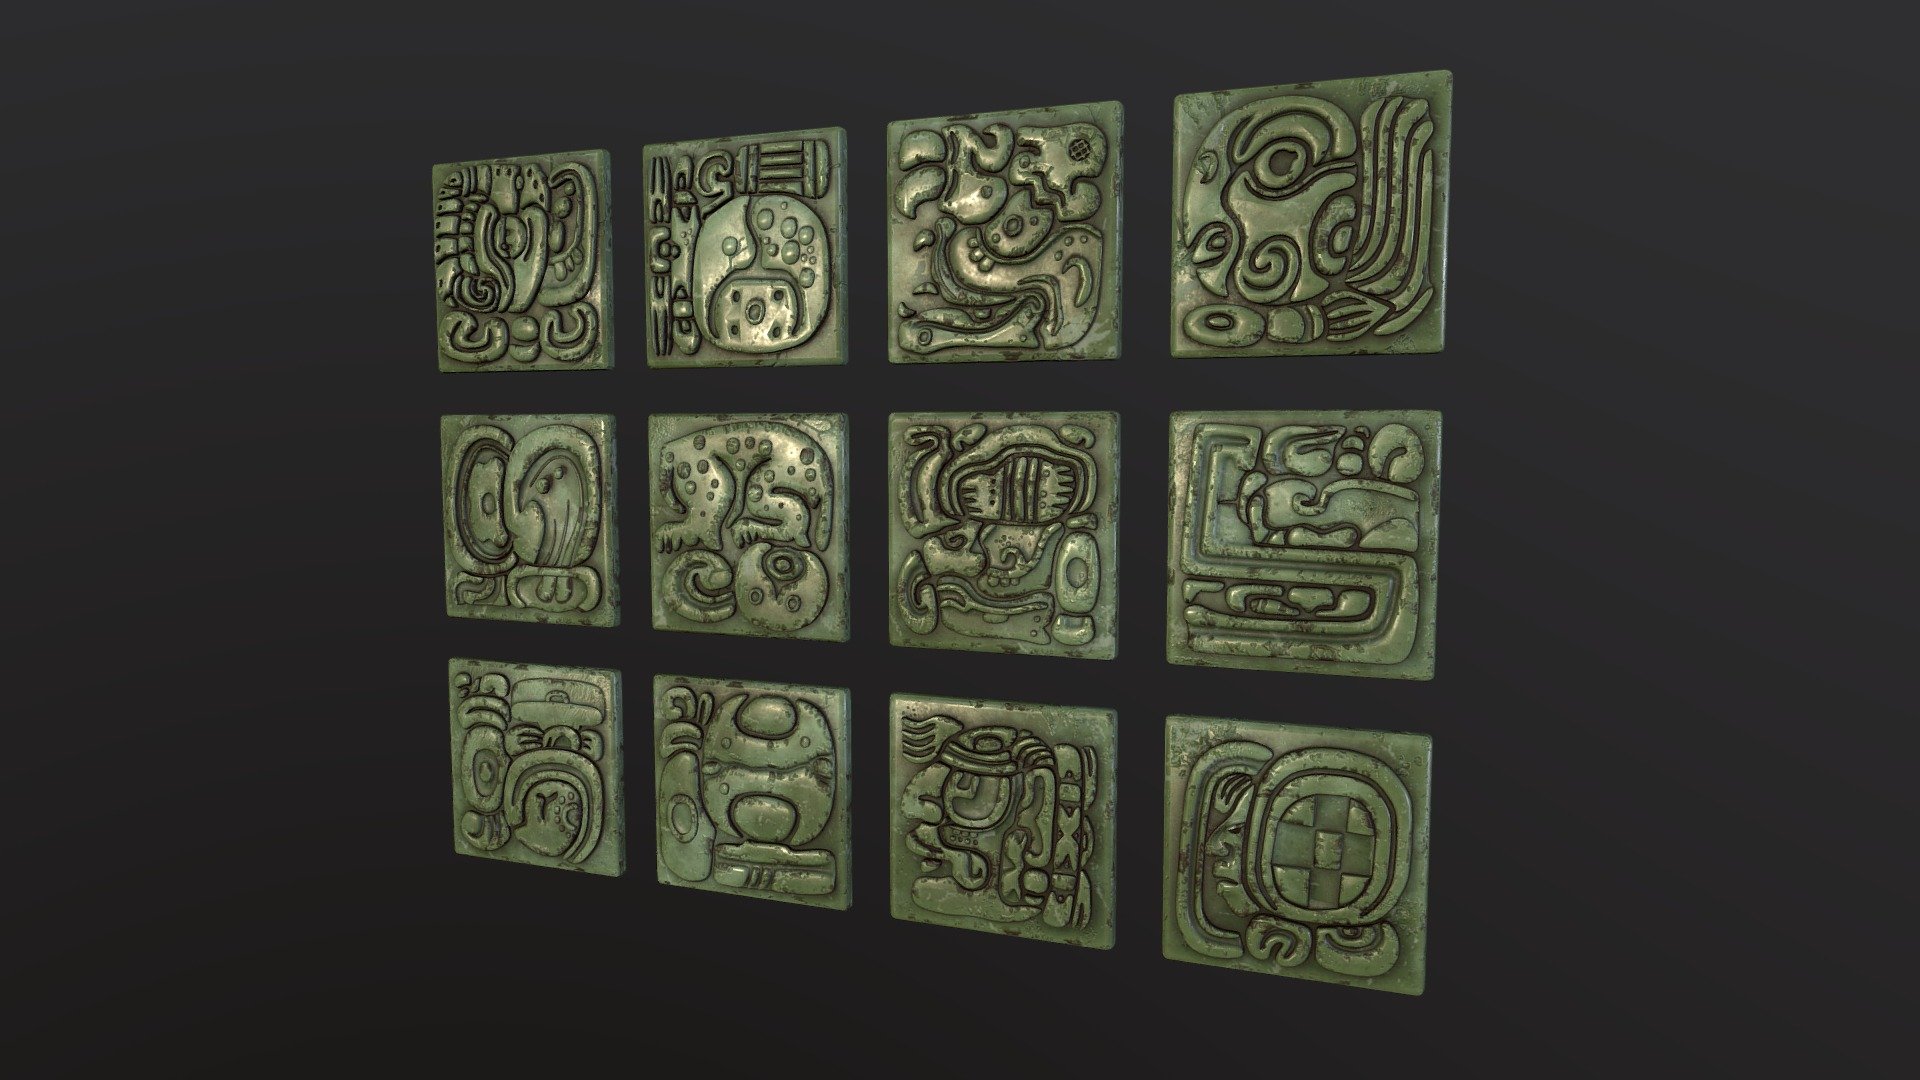 3D model of a collection of ancient jade tiles. Mayan and aztec glyphs on the bas-relief.
Can be used as ancient artifacts or for inlaying art objects with them.

A highpoly model: https://skfb.ly/oRB76 - Ancient Mayan Jade Tiles (lowpoly) - Download Free 3D model by Chao Kurosaki (@chaokurosaki) 3d model